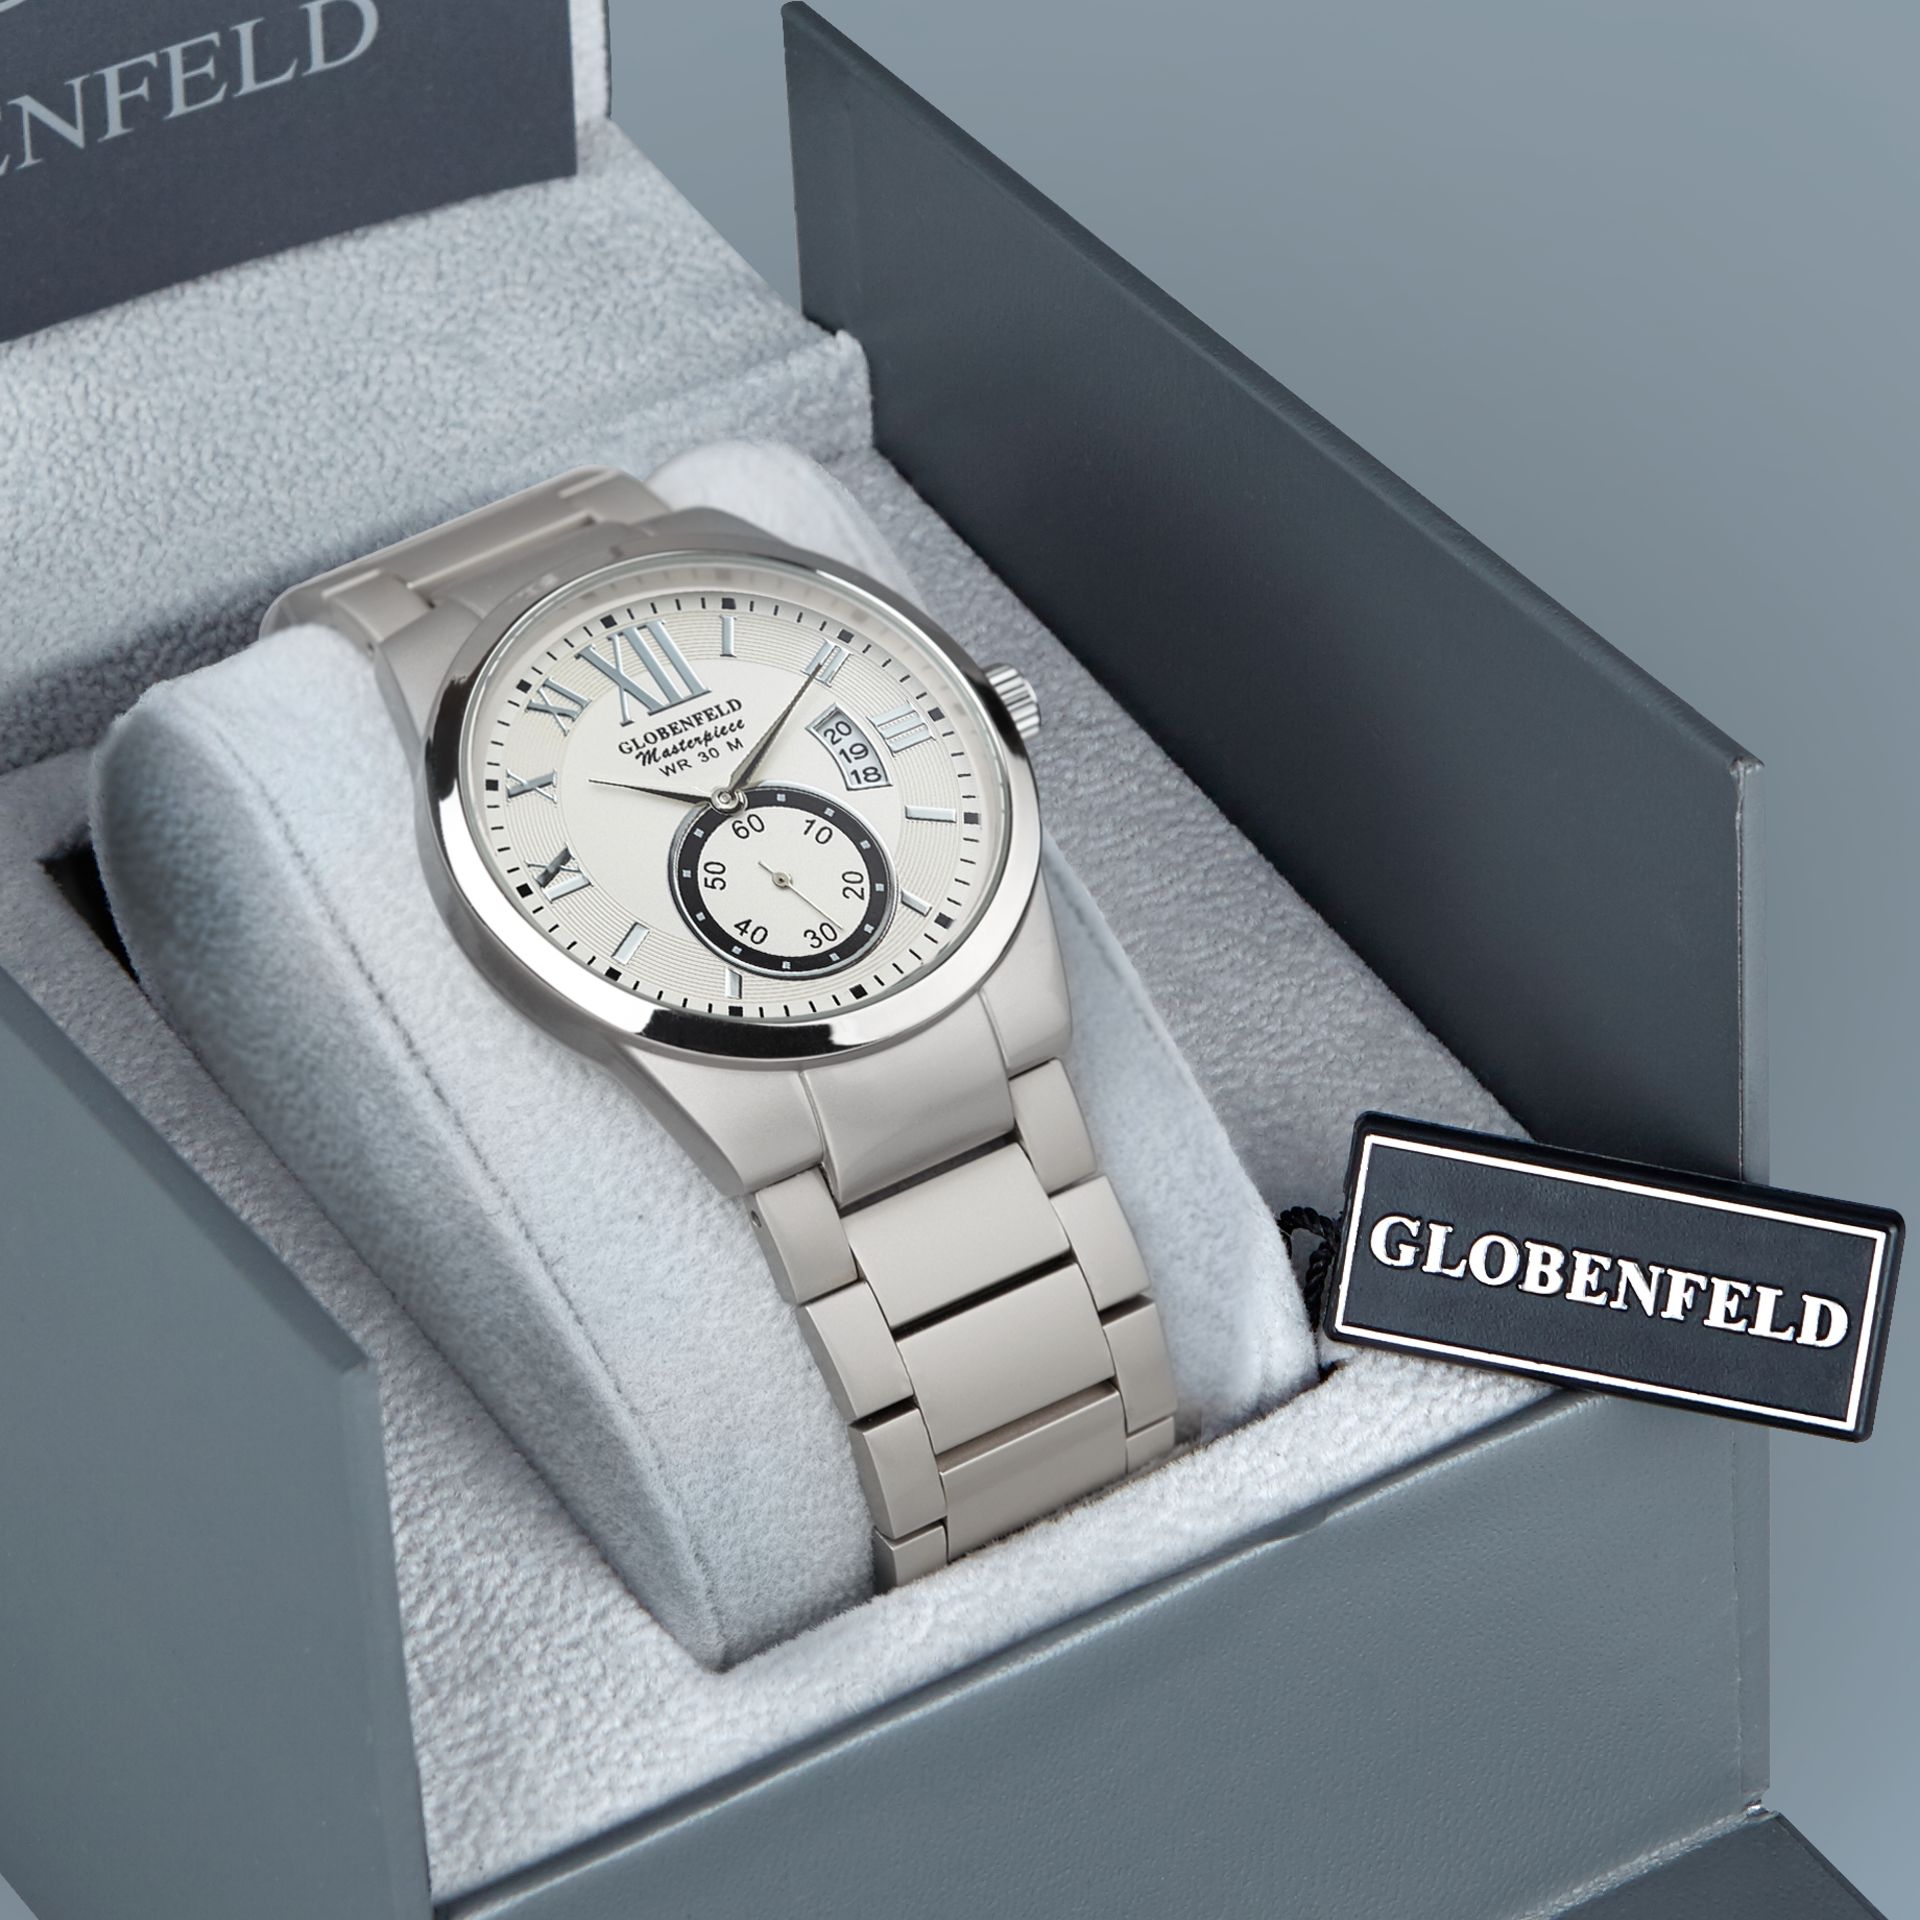 V Brand New Gents Globenfeld White Masterpiece Watch With Box & Papers SRP Up to £440.00 X 2 YOUR